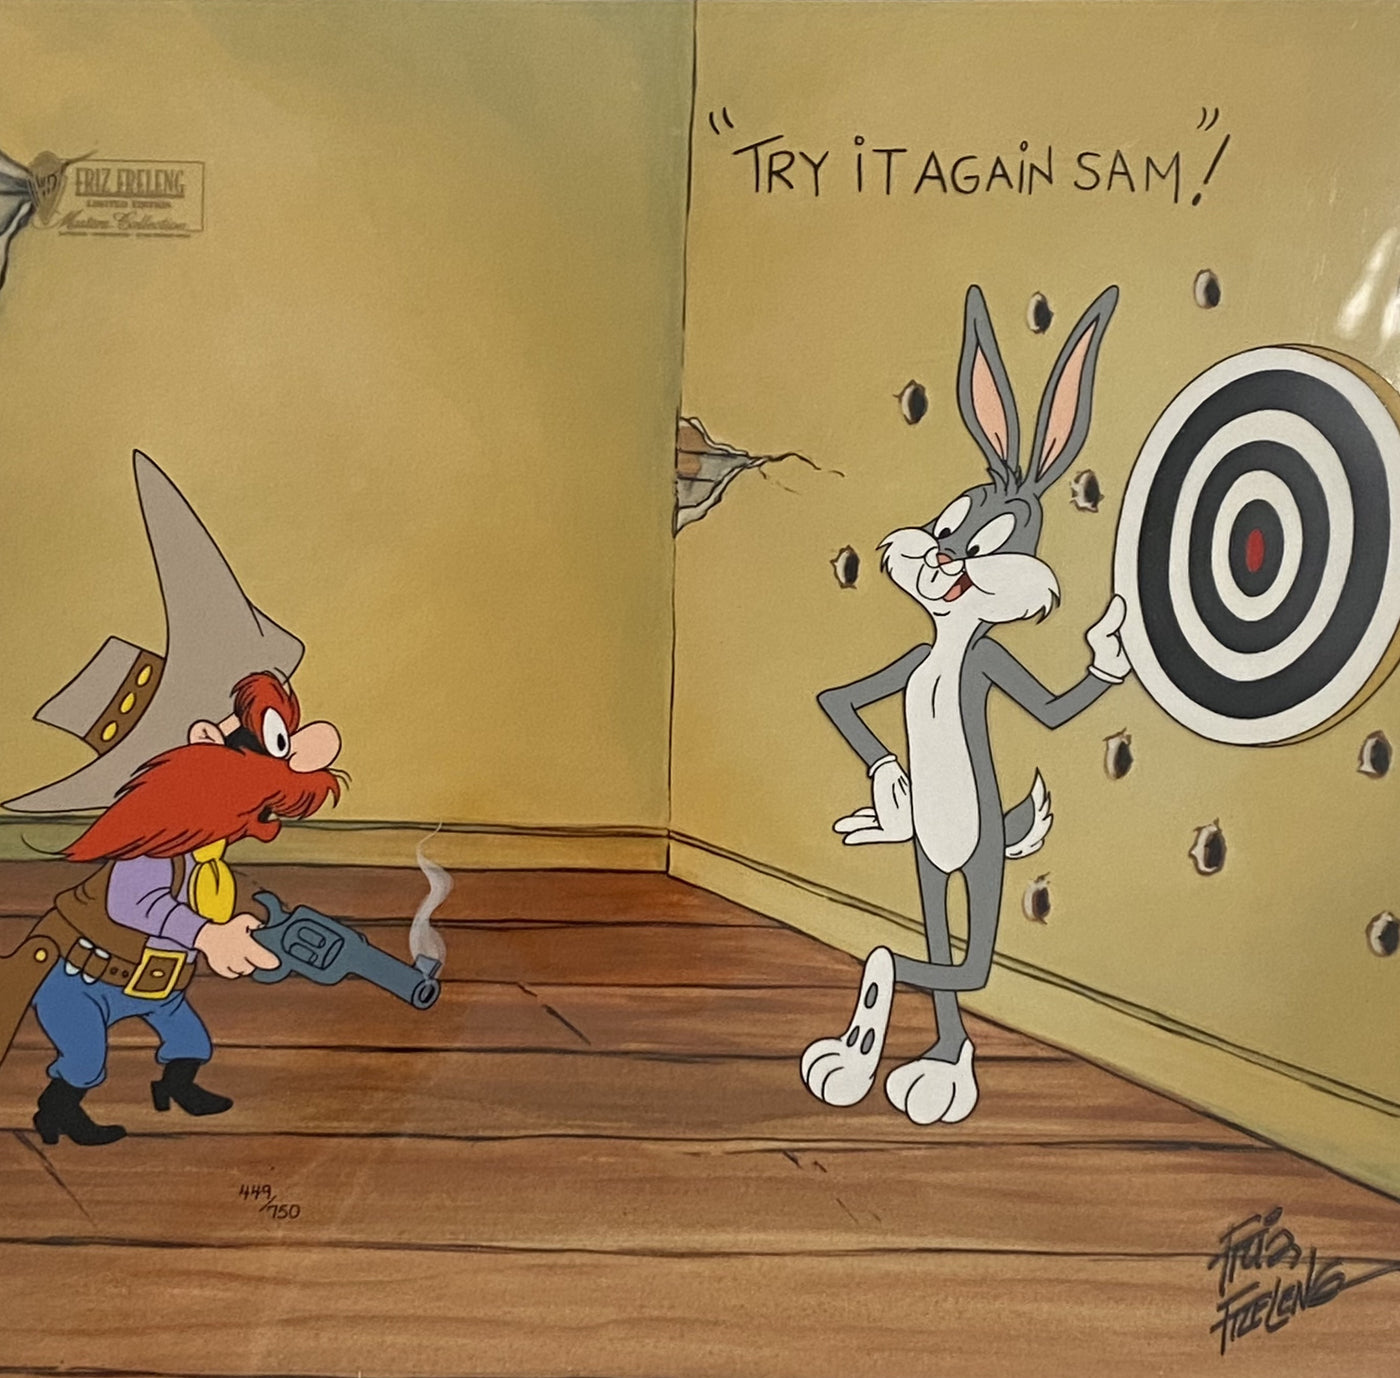 Warner Brothers "Try It Again Sam" Limited Edition Cel Signed by Friz Freleng Featuring Bugs Bunny and Yosemite Sam